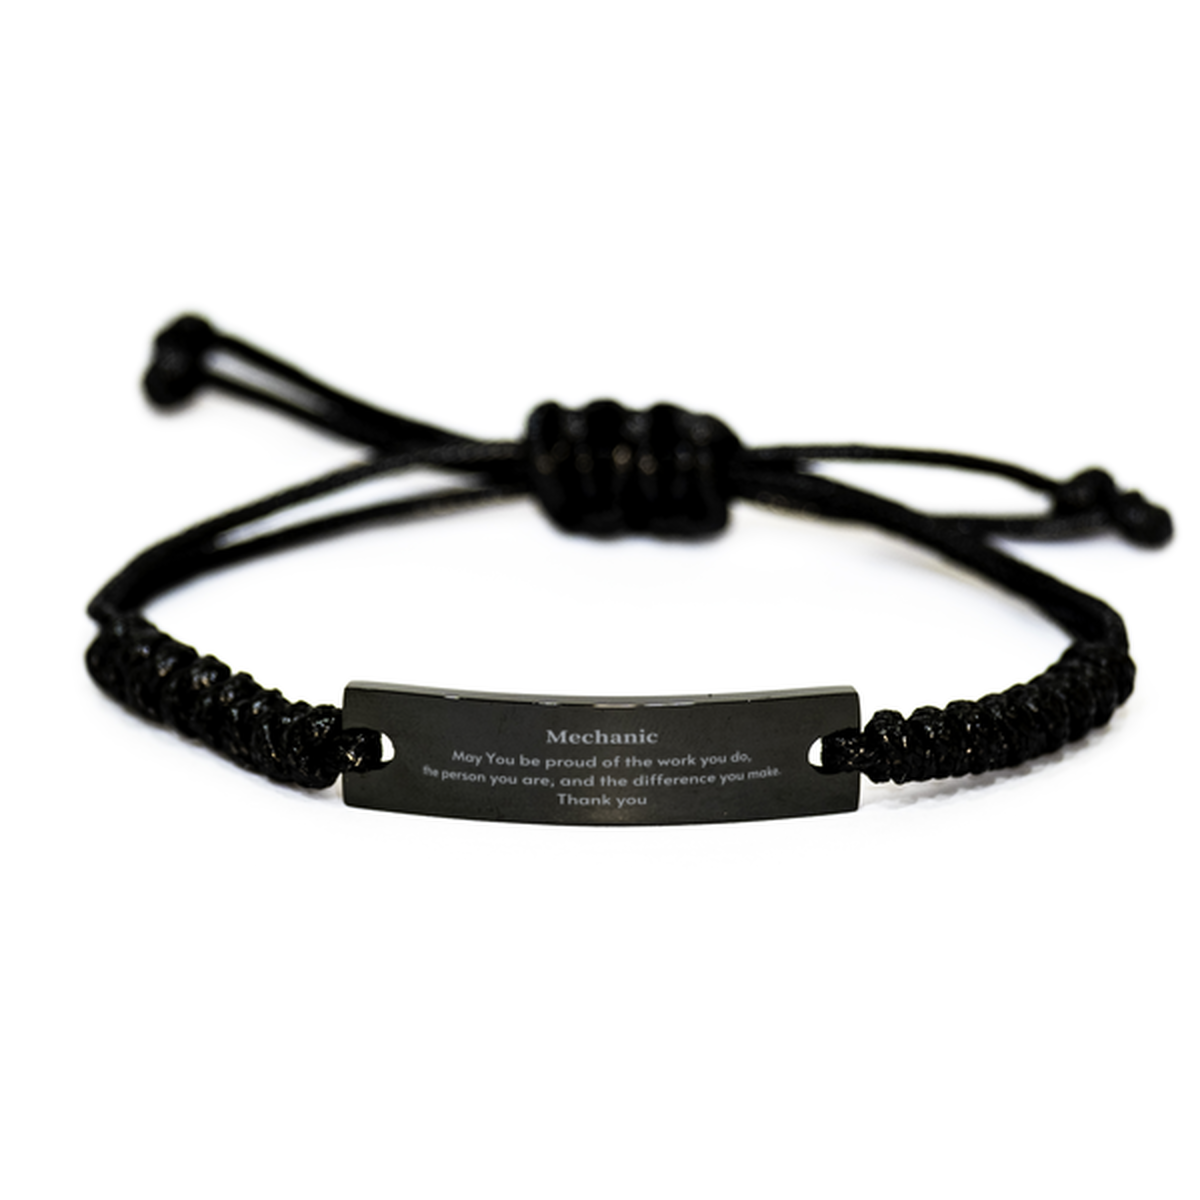 Heartwarming Black Rope Bracelet Retirement Coworkers Gifts for Mechanic, Mechanic May You be proud of the work you do, the person you are Gifts for Boss Men Women Friends